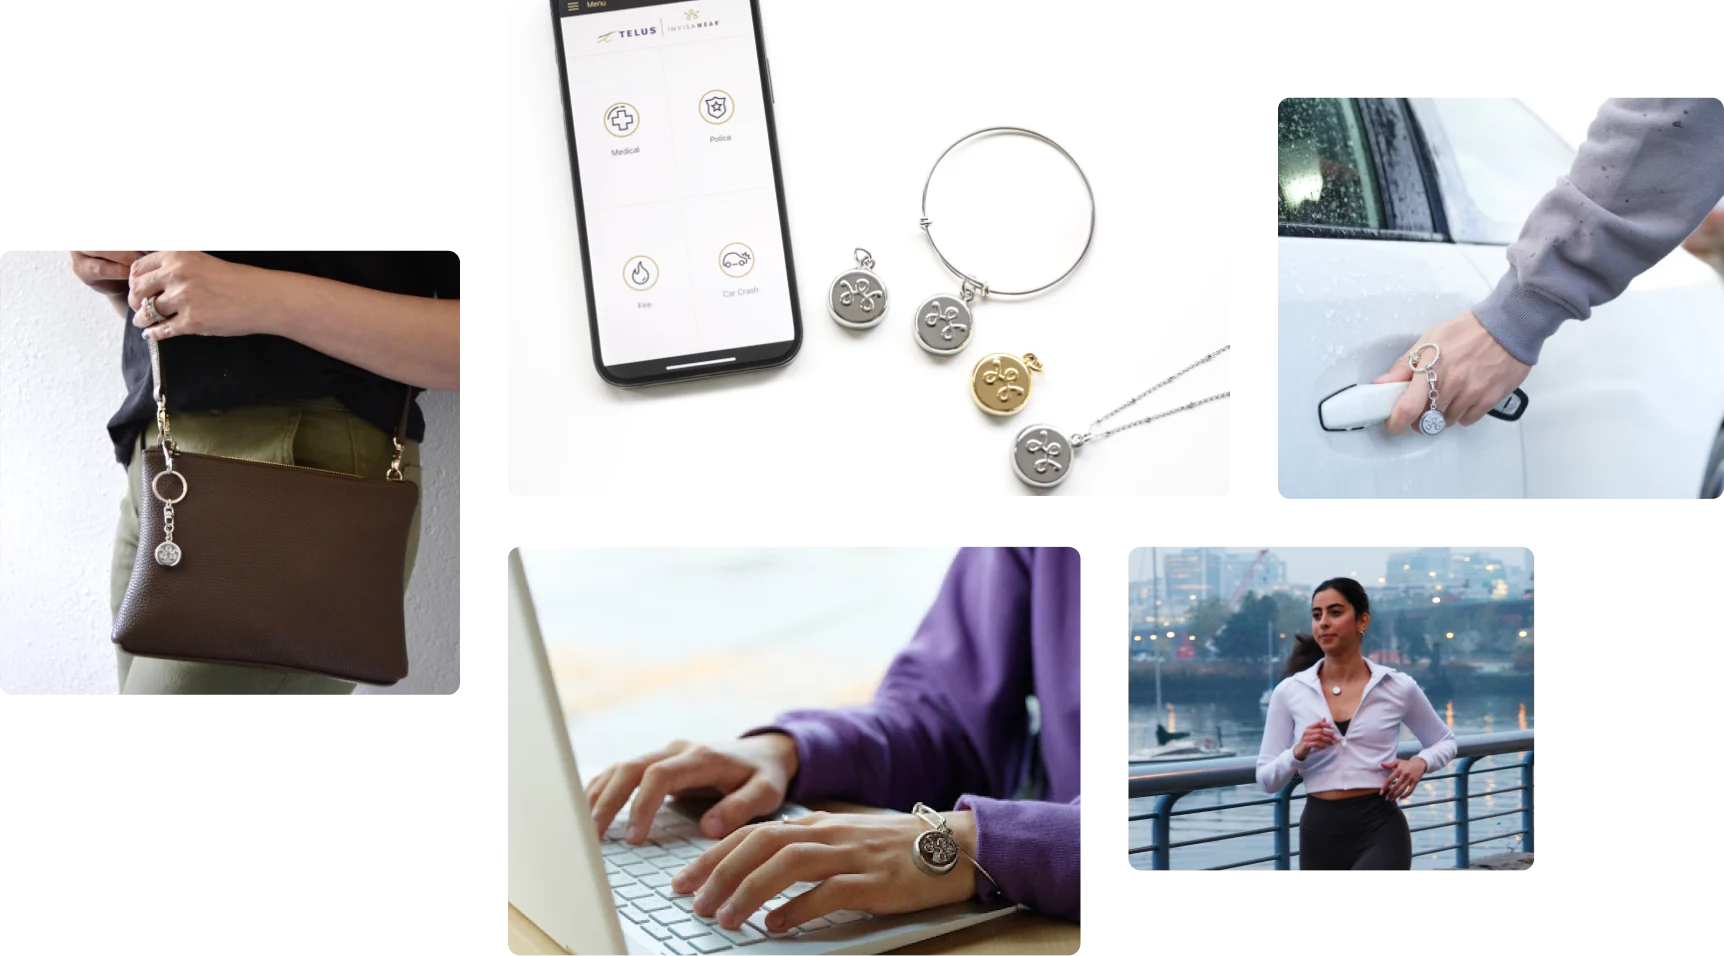 We see a collage of SmartWear Security safety devices, charms, bracelets, keychains, and necklaces on people studying and out running.